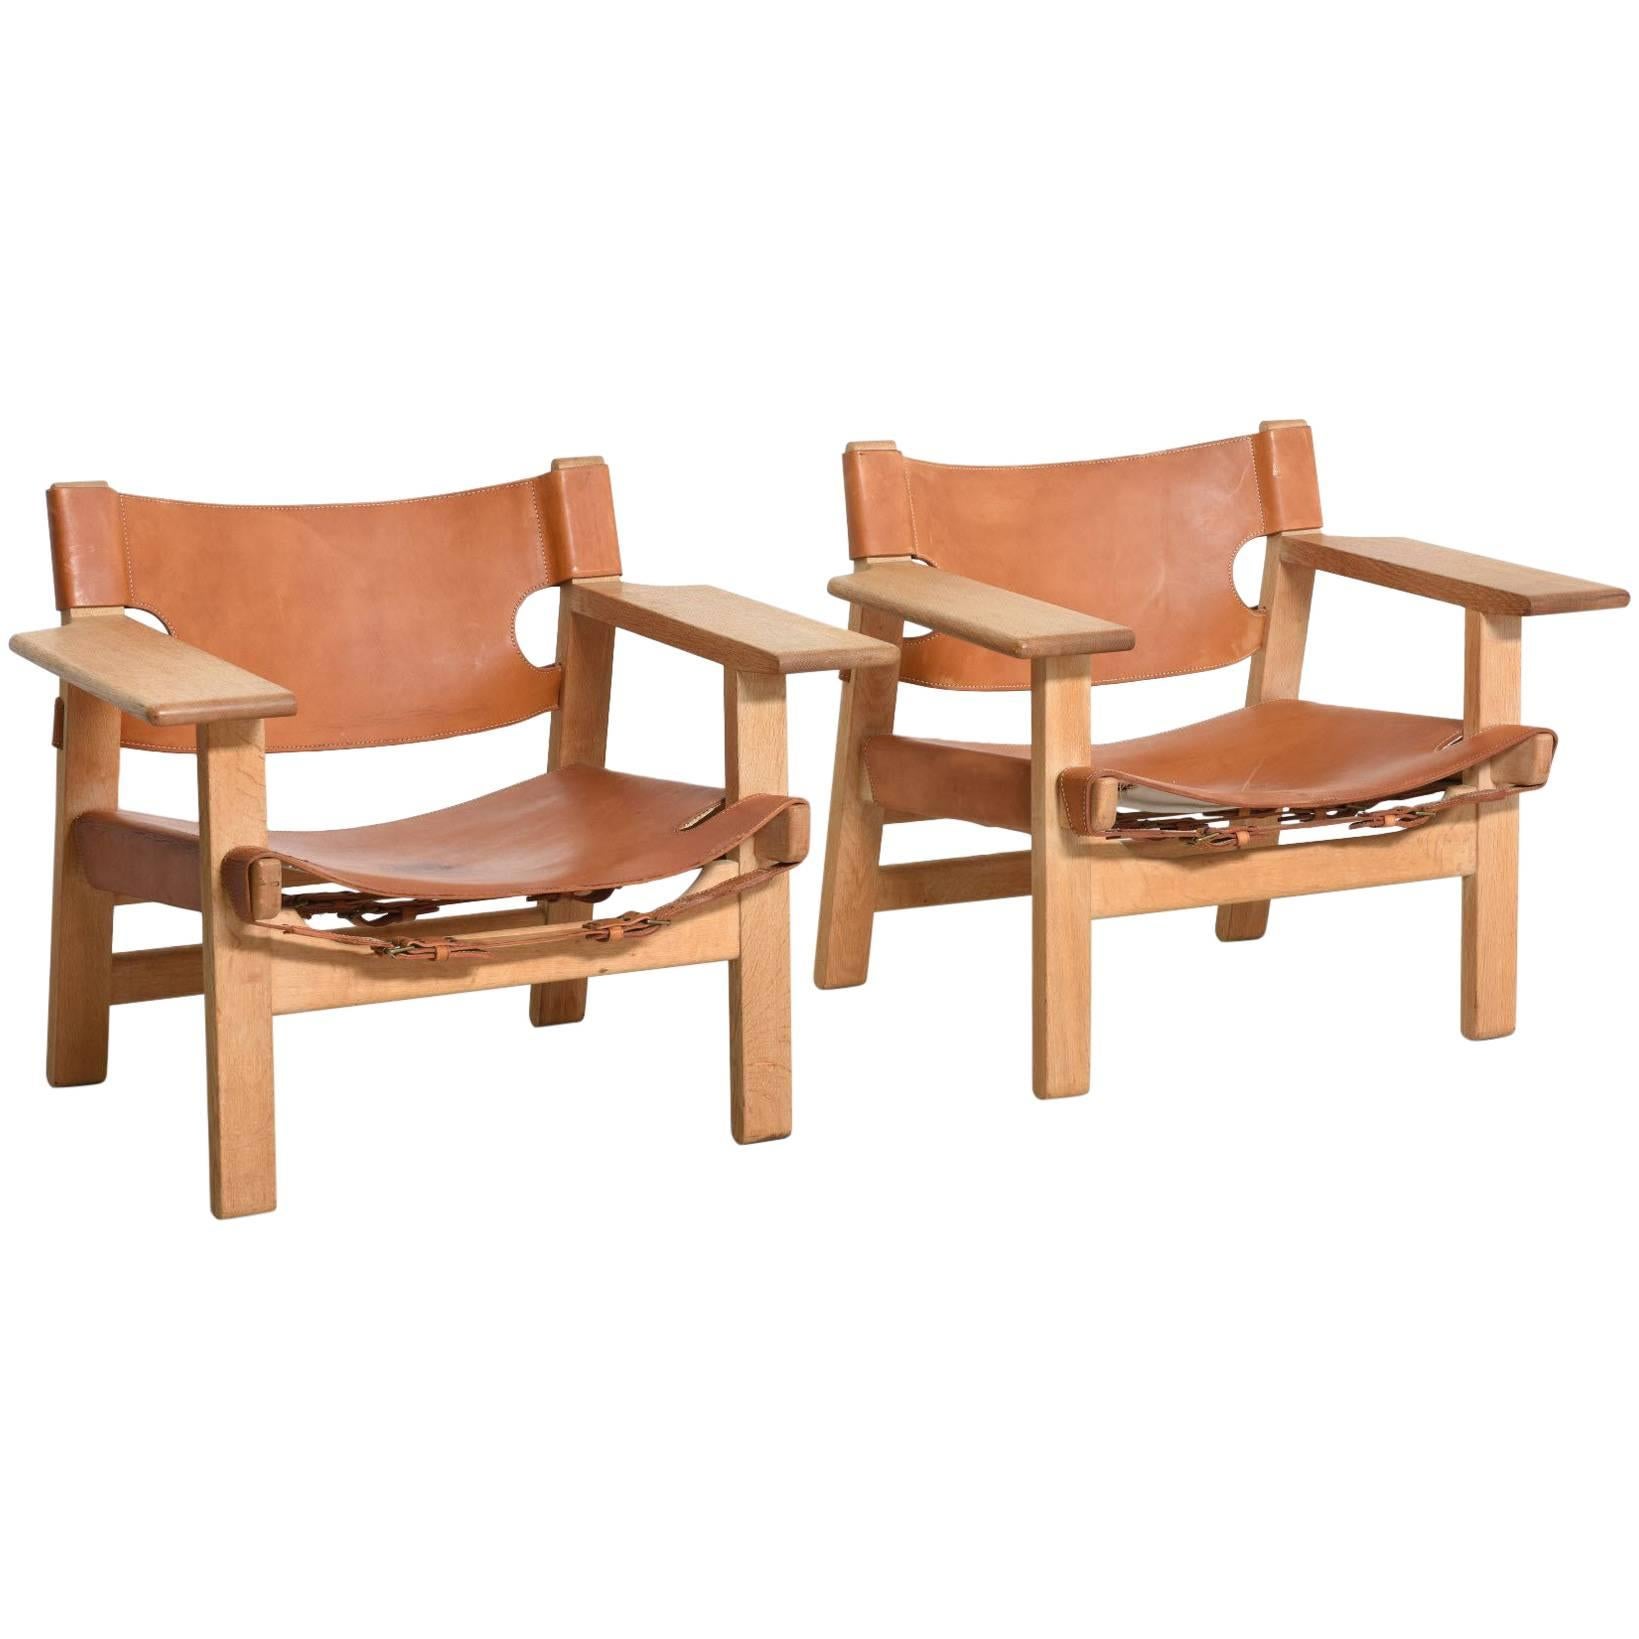 Pair of Spanish Chairs in Oak and Leather by Børge Mogensen, circa 1958